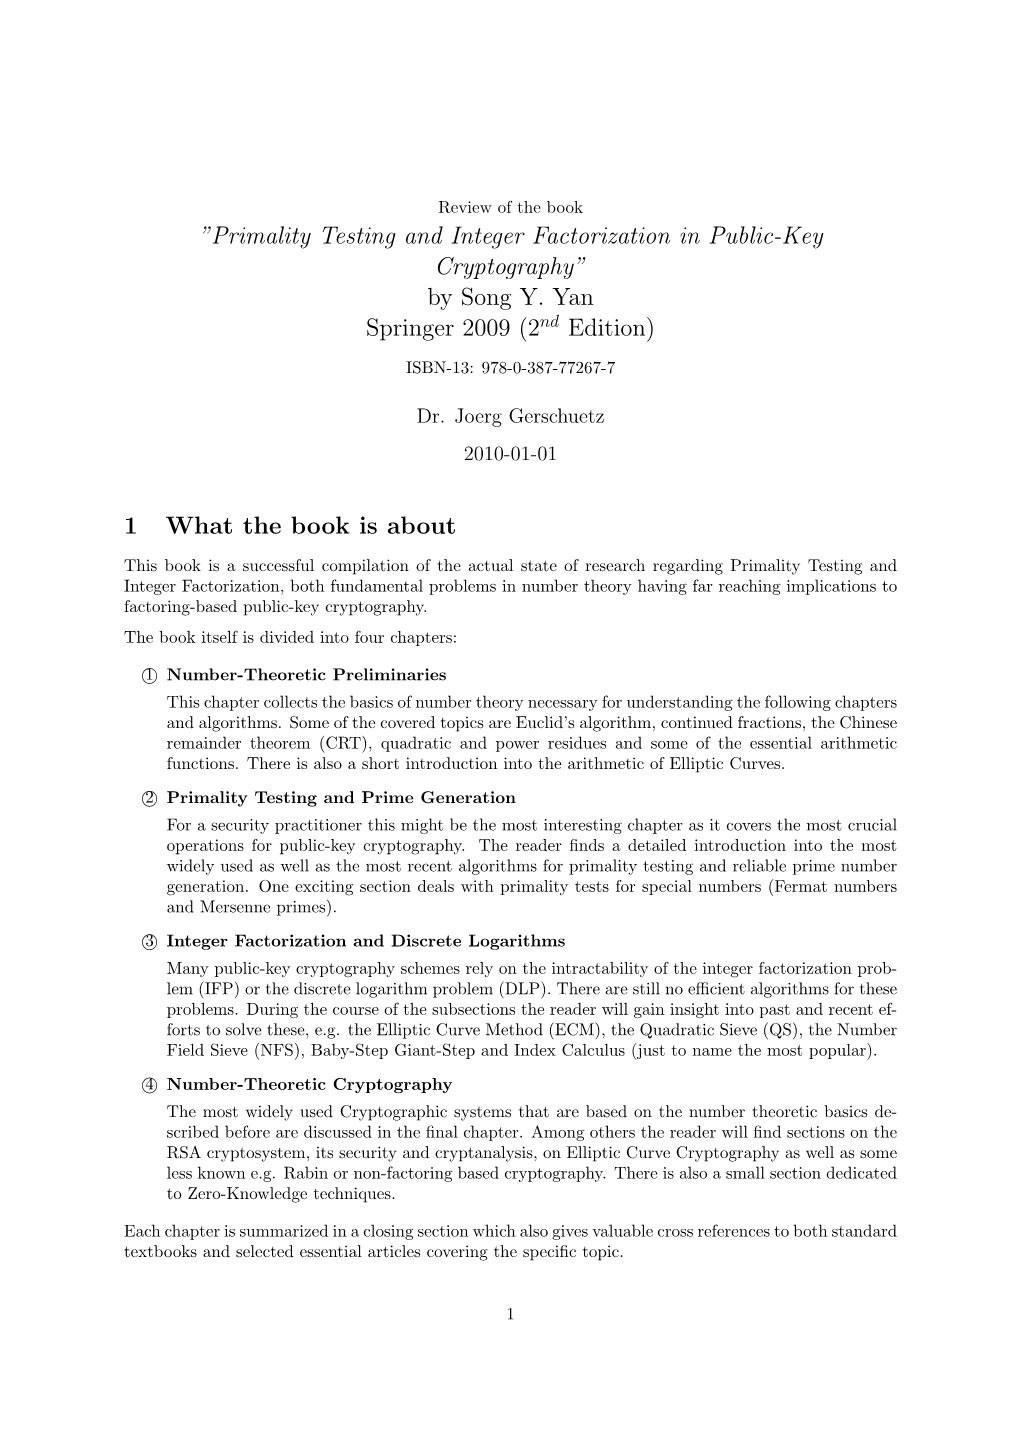 ”Primality Testing and Integer Factorization in Public-Key Cryptography” by Song Y